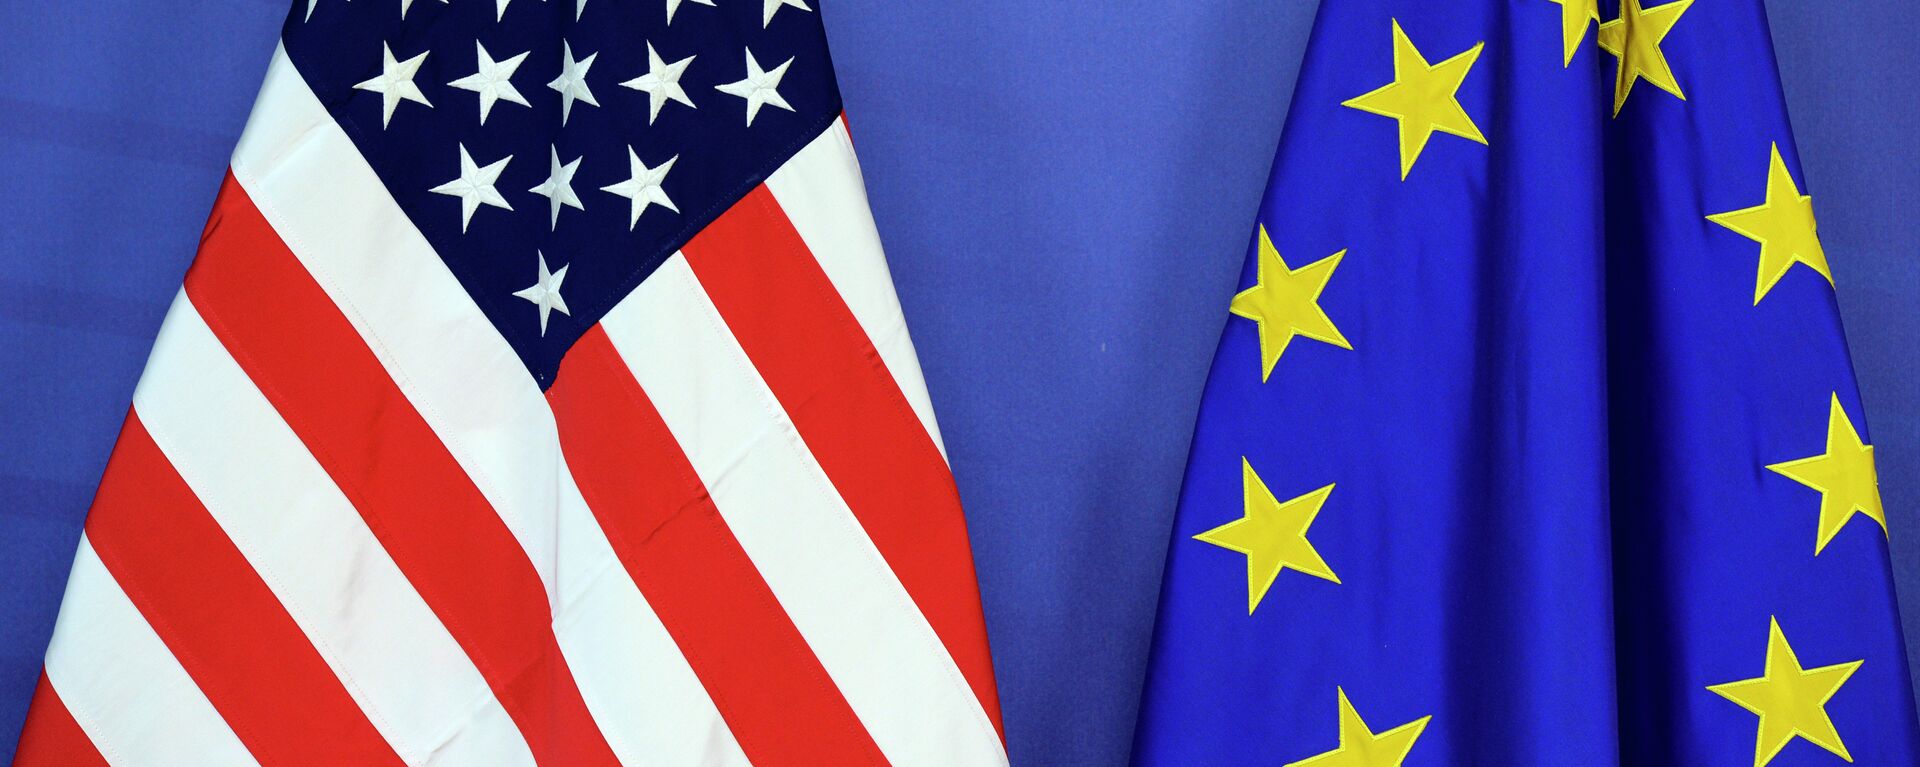 The US national flag (L) and the flag of the European Union are placed side-by-side during the Transatlantic Trade and Investment Partnership (TTIP) meeting at the European Union Commission headquarter in Brussels, on July 13, 2015 - Sputnik Mundo, 1920, 28.02.2022